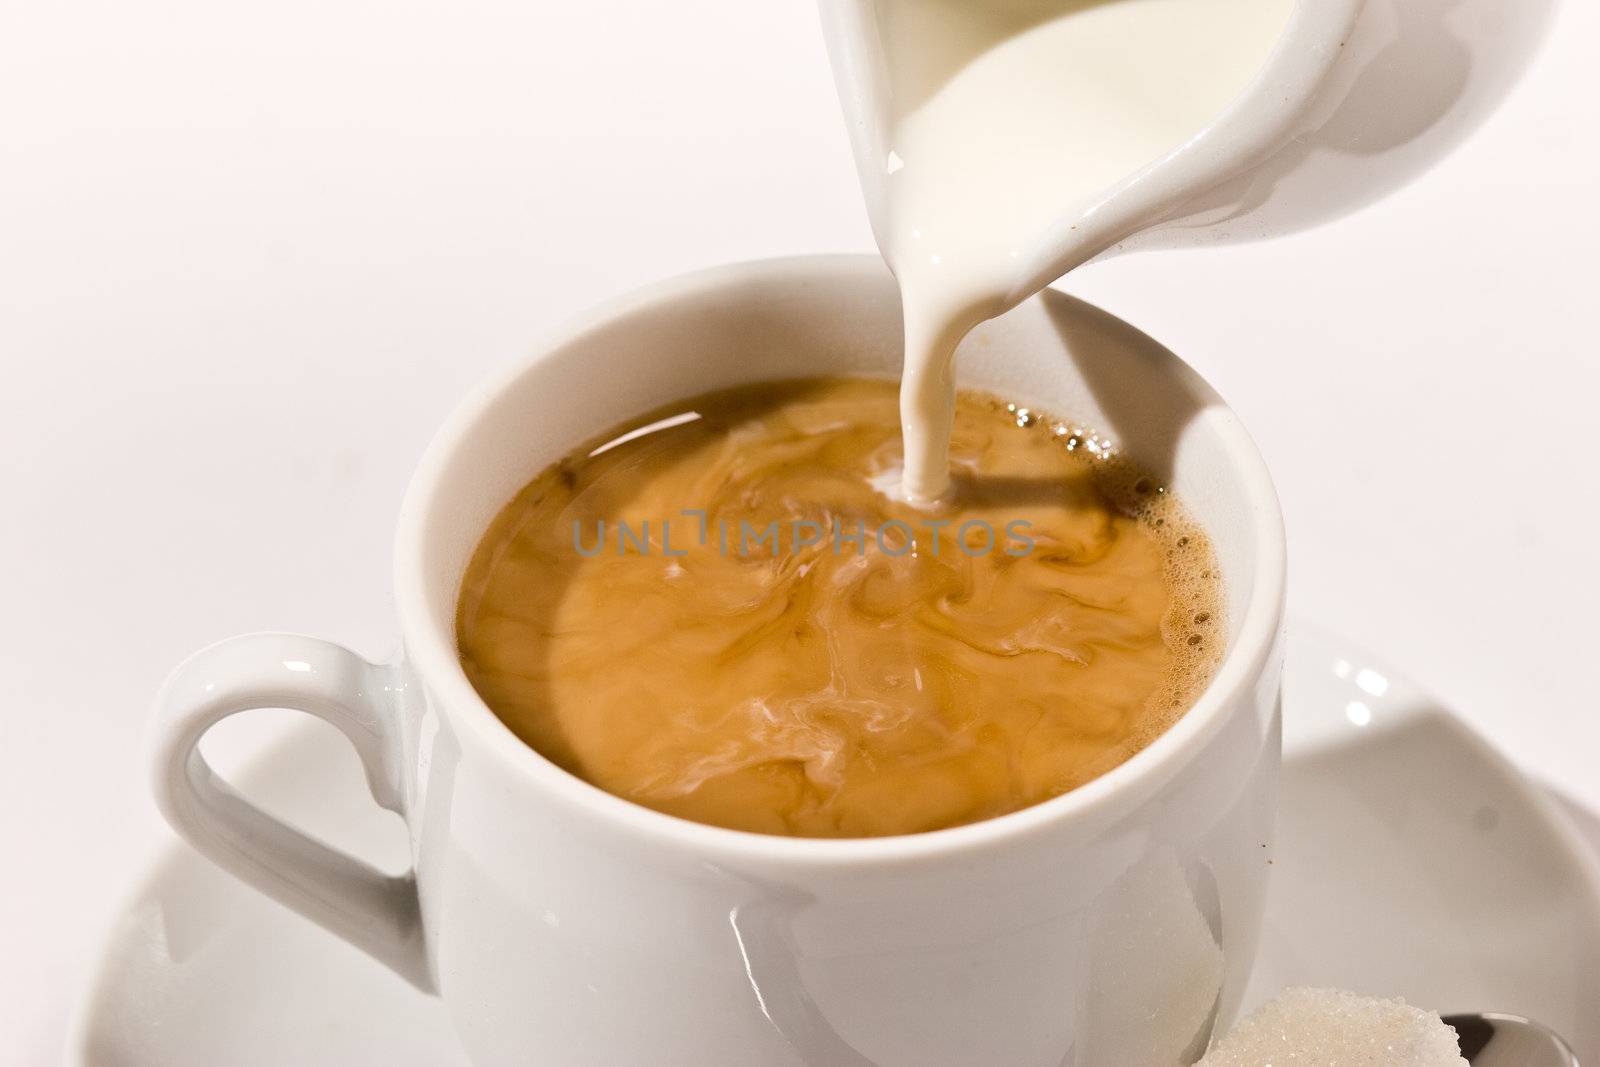 Puring milk in a cup of coffee